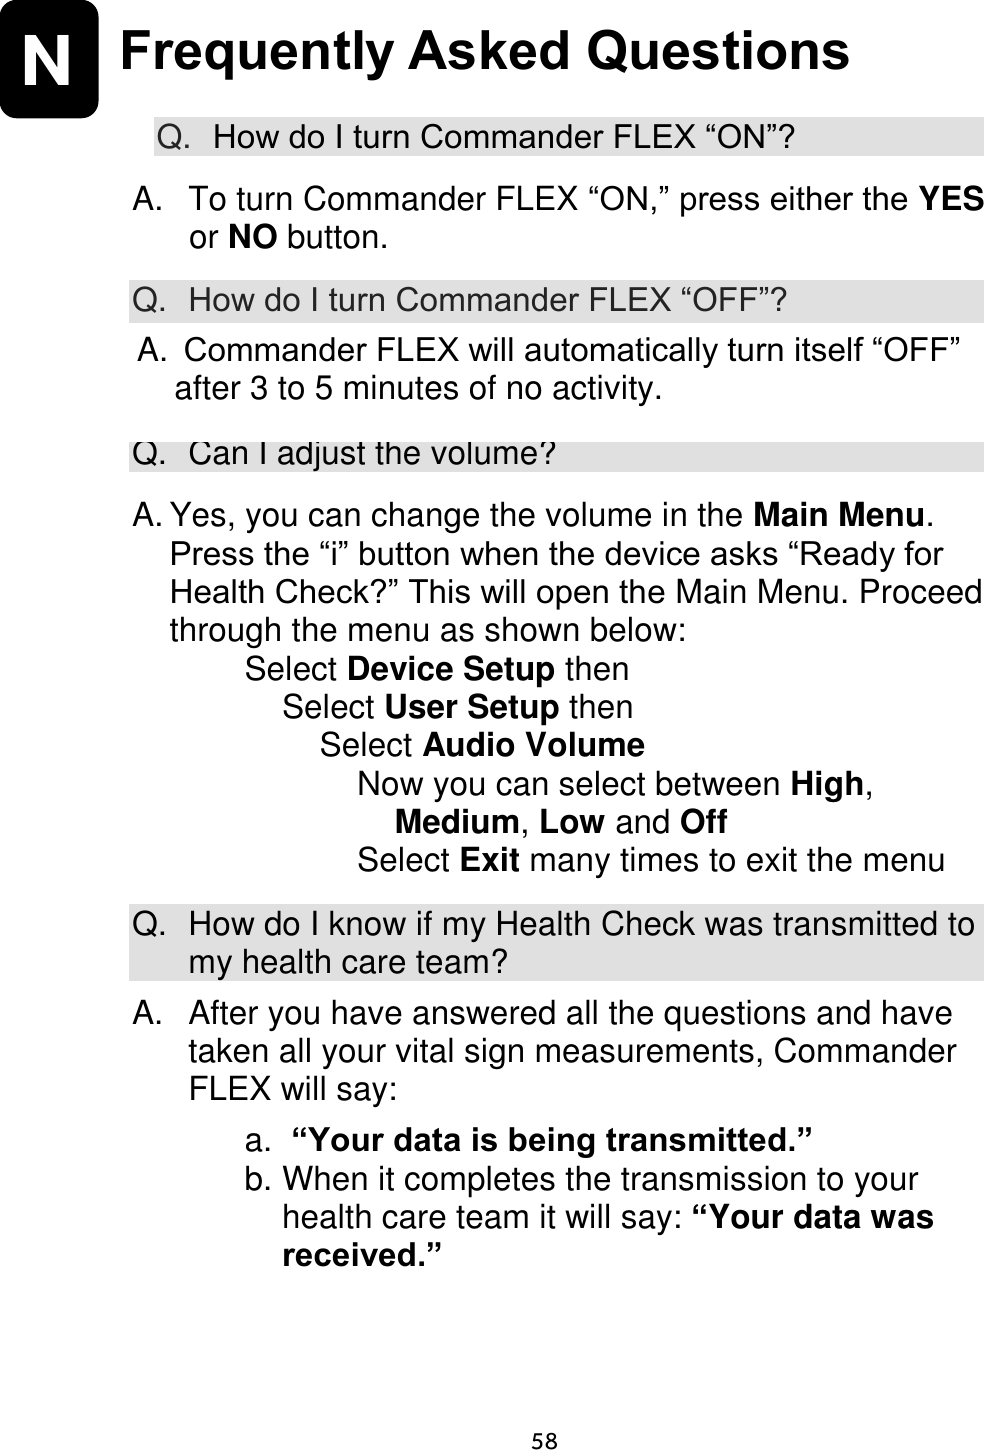                      58 N Frequently Asked Questions  Q. How do I turn Commander FLEX “ON”?  A.  To turn Commander FLEX “ON,” press either the YES or NO button.  Q. How do I turn Commander FLEX “OFF”?  A.  Commander FLEX CD320 will automatically turn itself “OFF” after 3 to 5 minutes of no activity. Q. Can I adjust the volume?  A. Yes, you can change the volume in the Main Menu. Press the “i” button when the device asks “Ready for Health Check?” This will open the Main Menu. Proceed through the menu as shown below: Select Device Setup then Select User Setup then Select Audio Volume Now you can select between High, Medium, Low and Off Select Exit many times to exit the menu  Q.  How do I know if my Health Check was transmitted to my health care team? A.   After you have answered all the questions and have taken all your vital sign measurements, Commander FLEX will say:  a.  “Your data is being transmitted.” b. When it completes the transmission to your health care team it will say: “Your data was received.”  A.  Commander FLEX will automatically turn itself “OFF” after 3 to 5 minutes of no activity. 